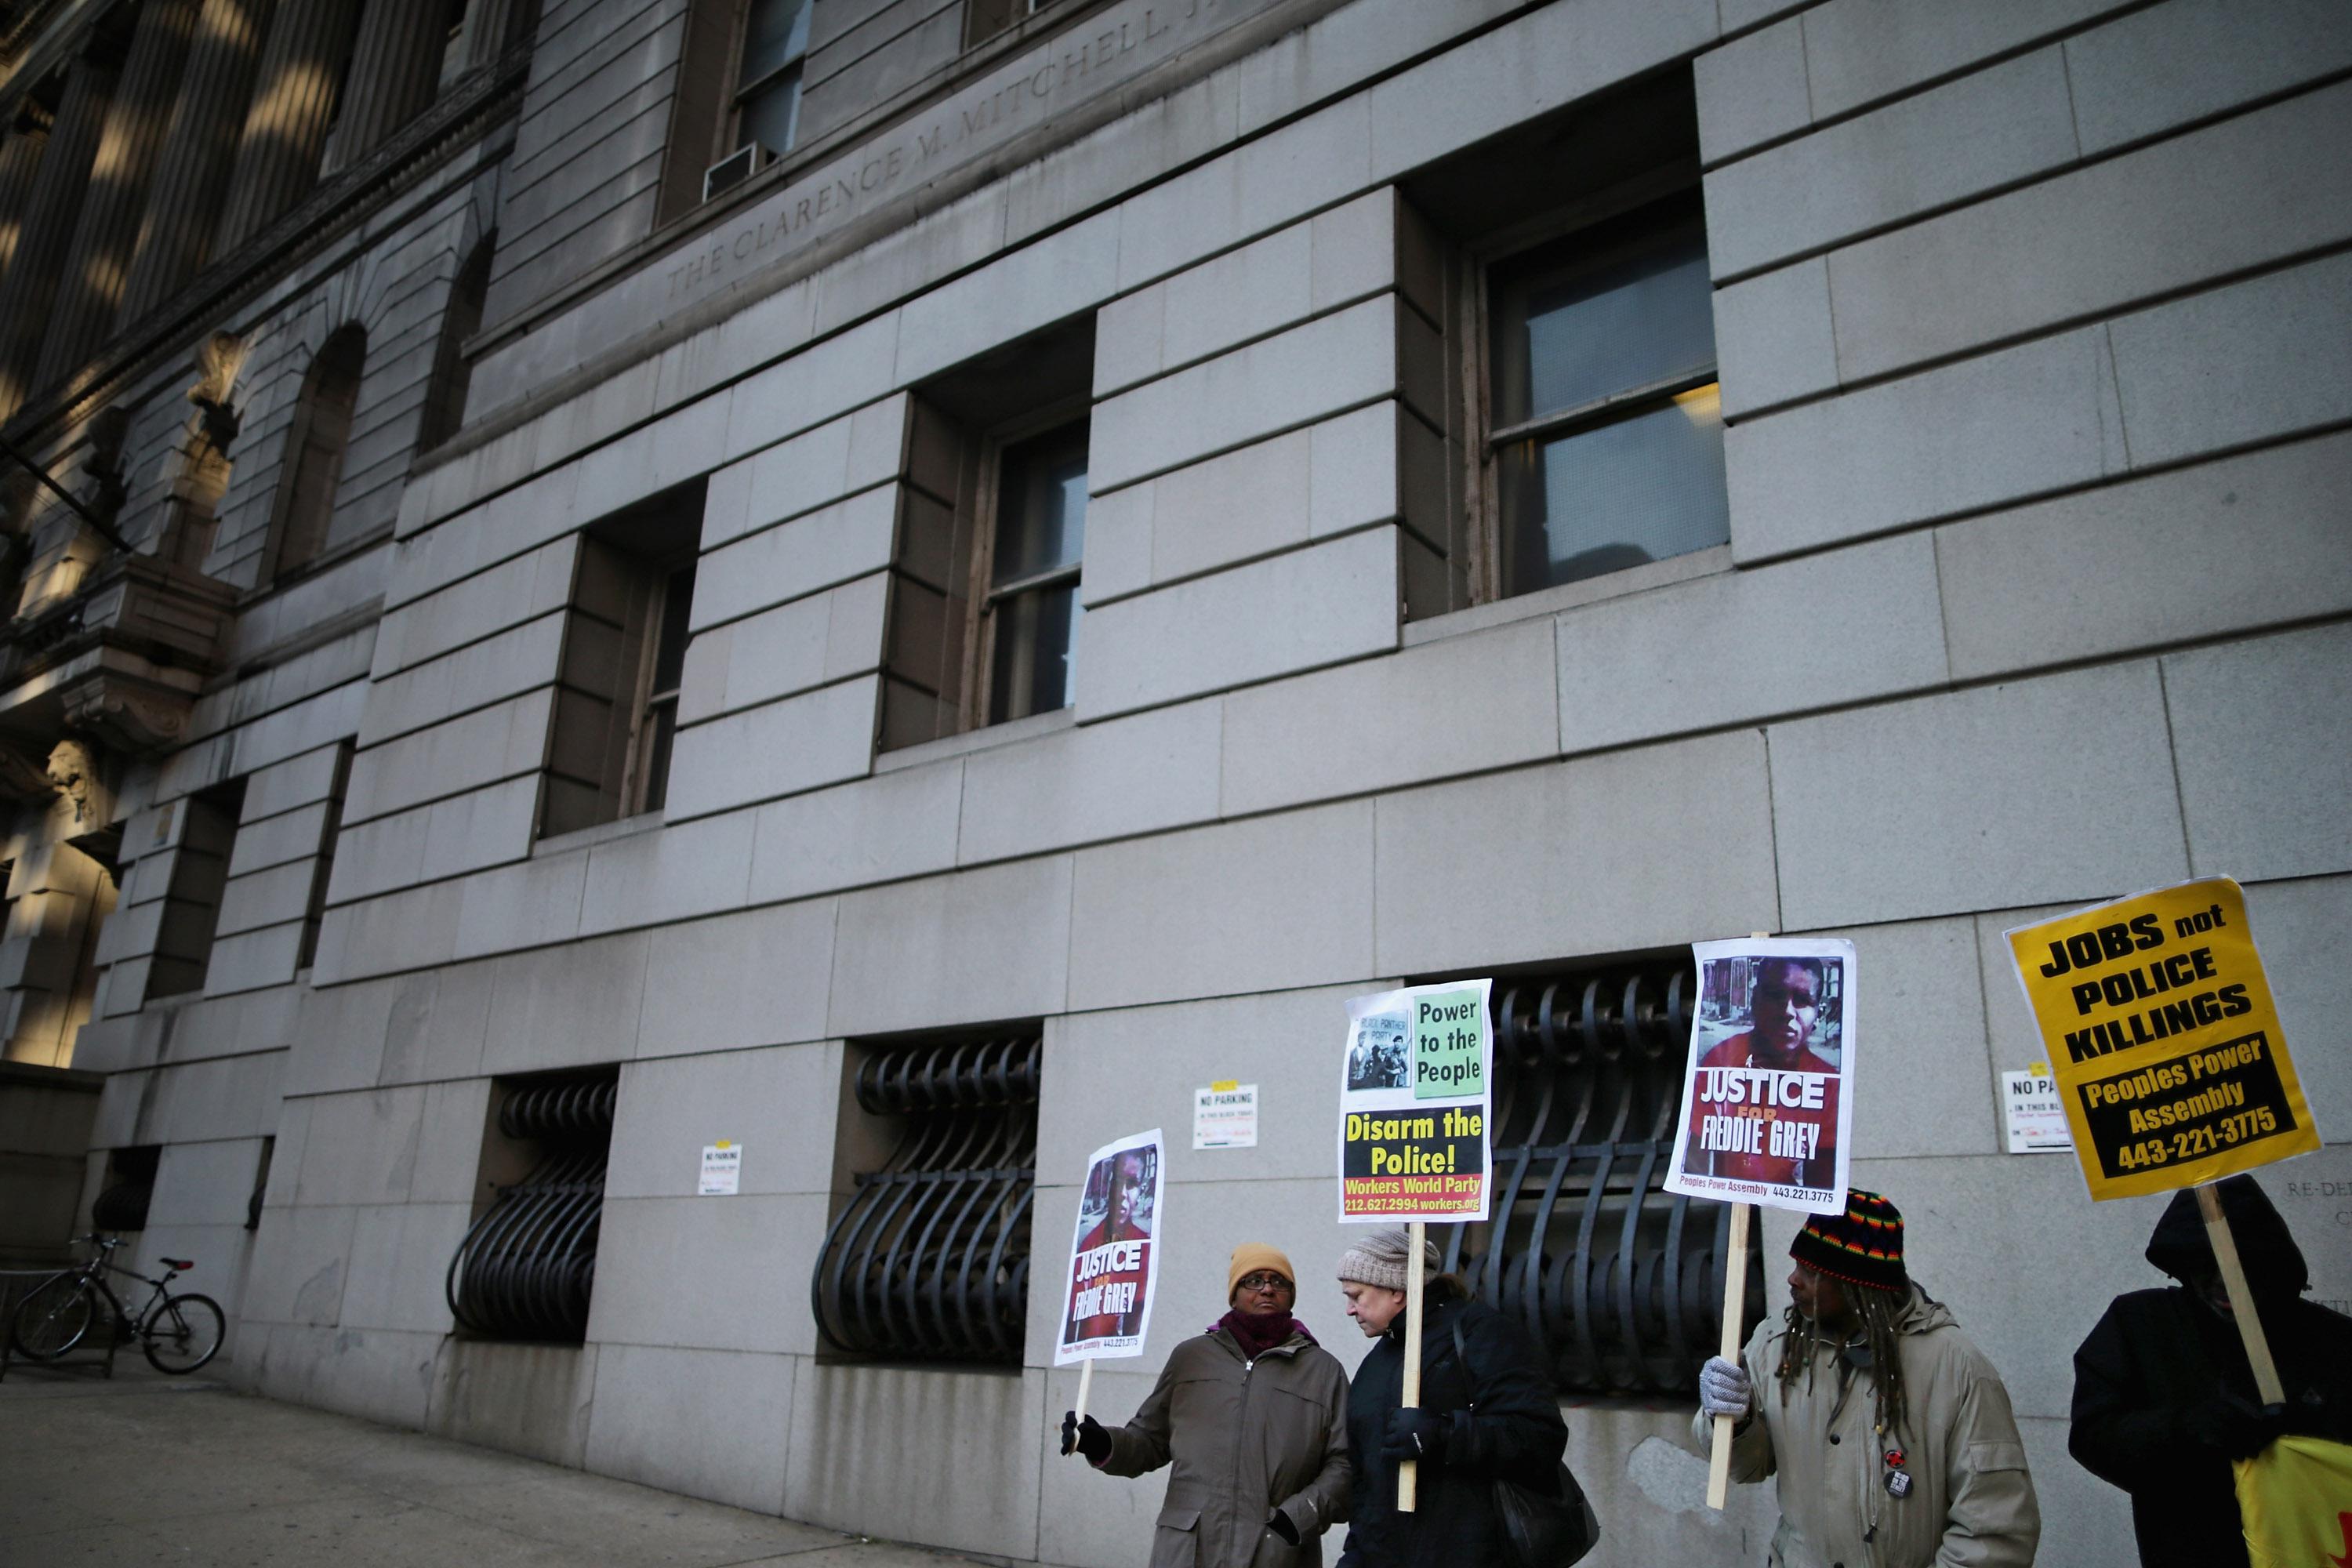 A group of protesters outside a courthouse hold signs demanding justice for Freddie Gray